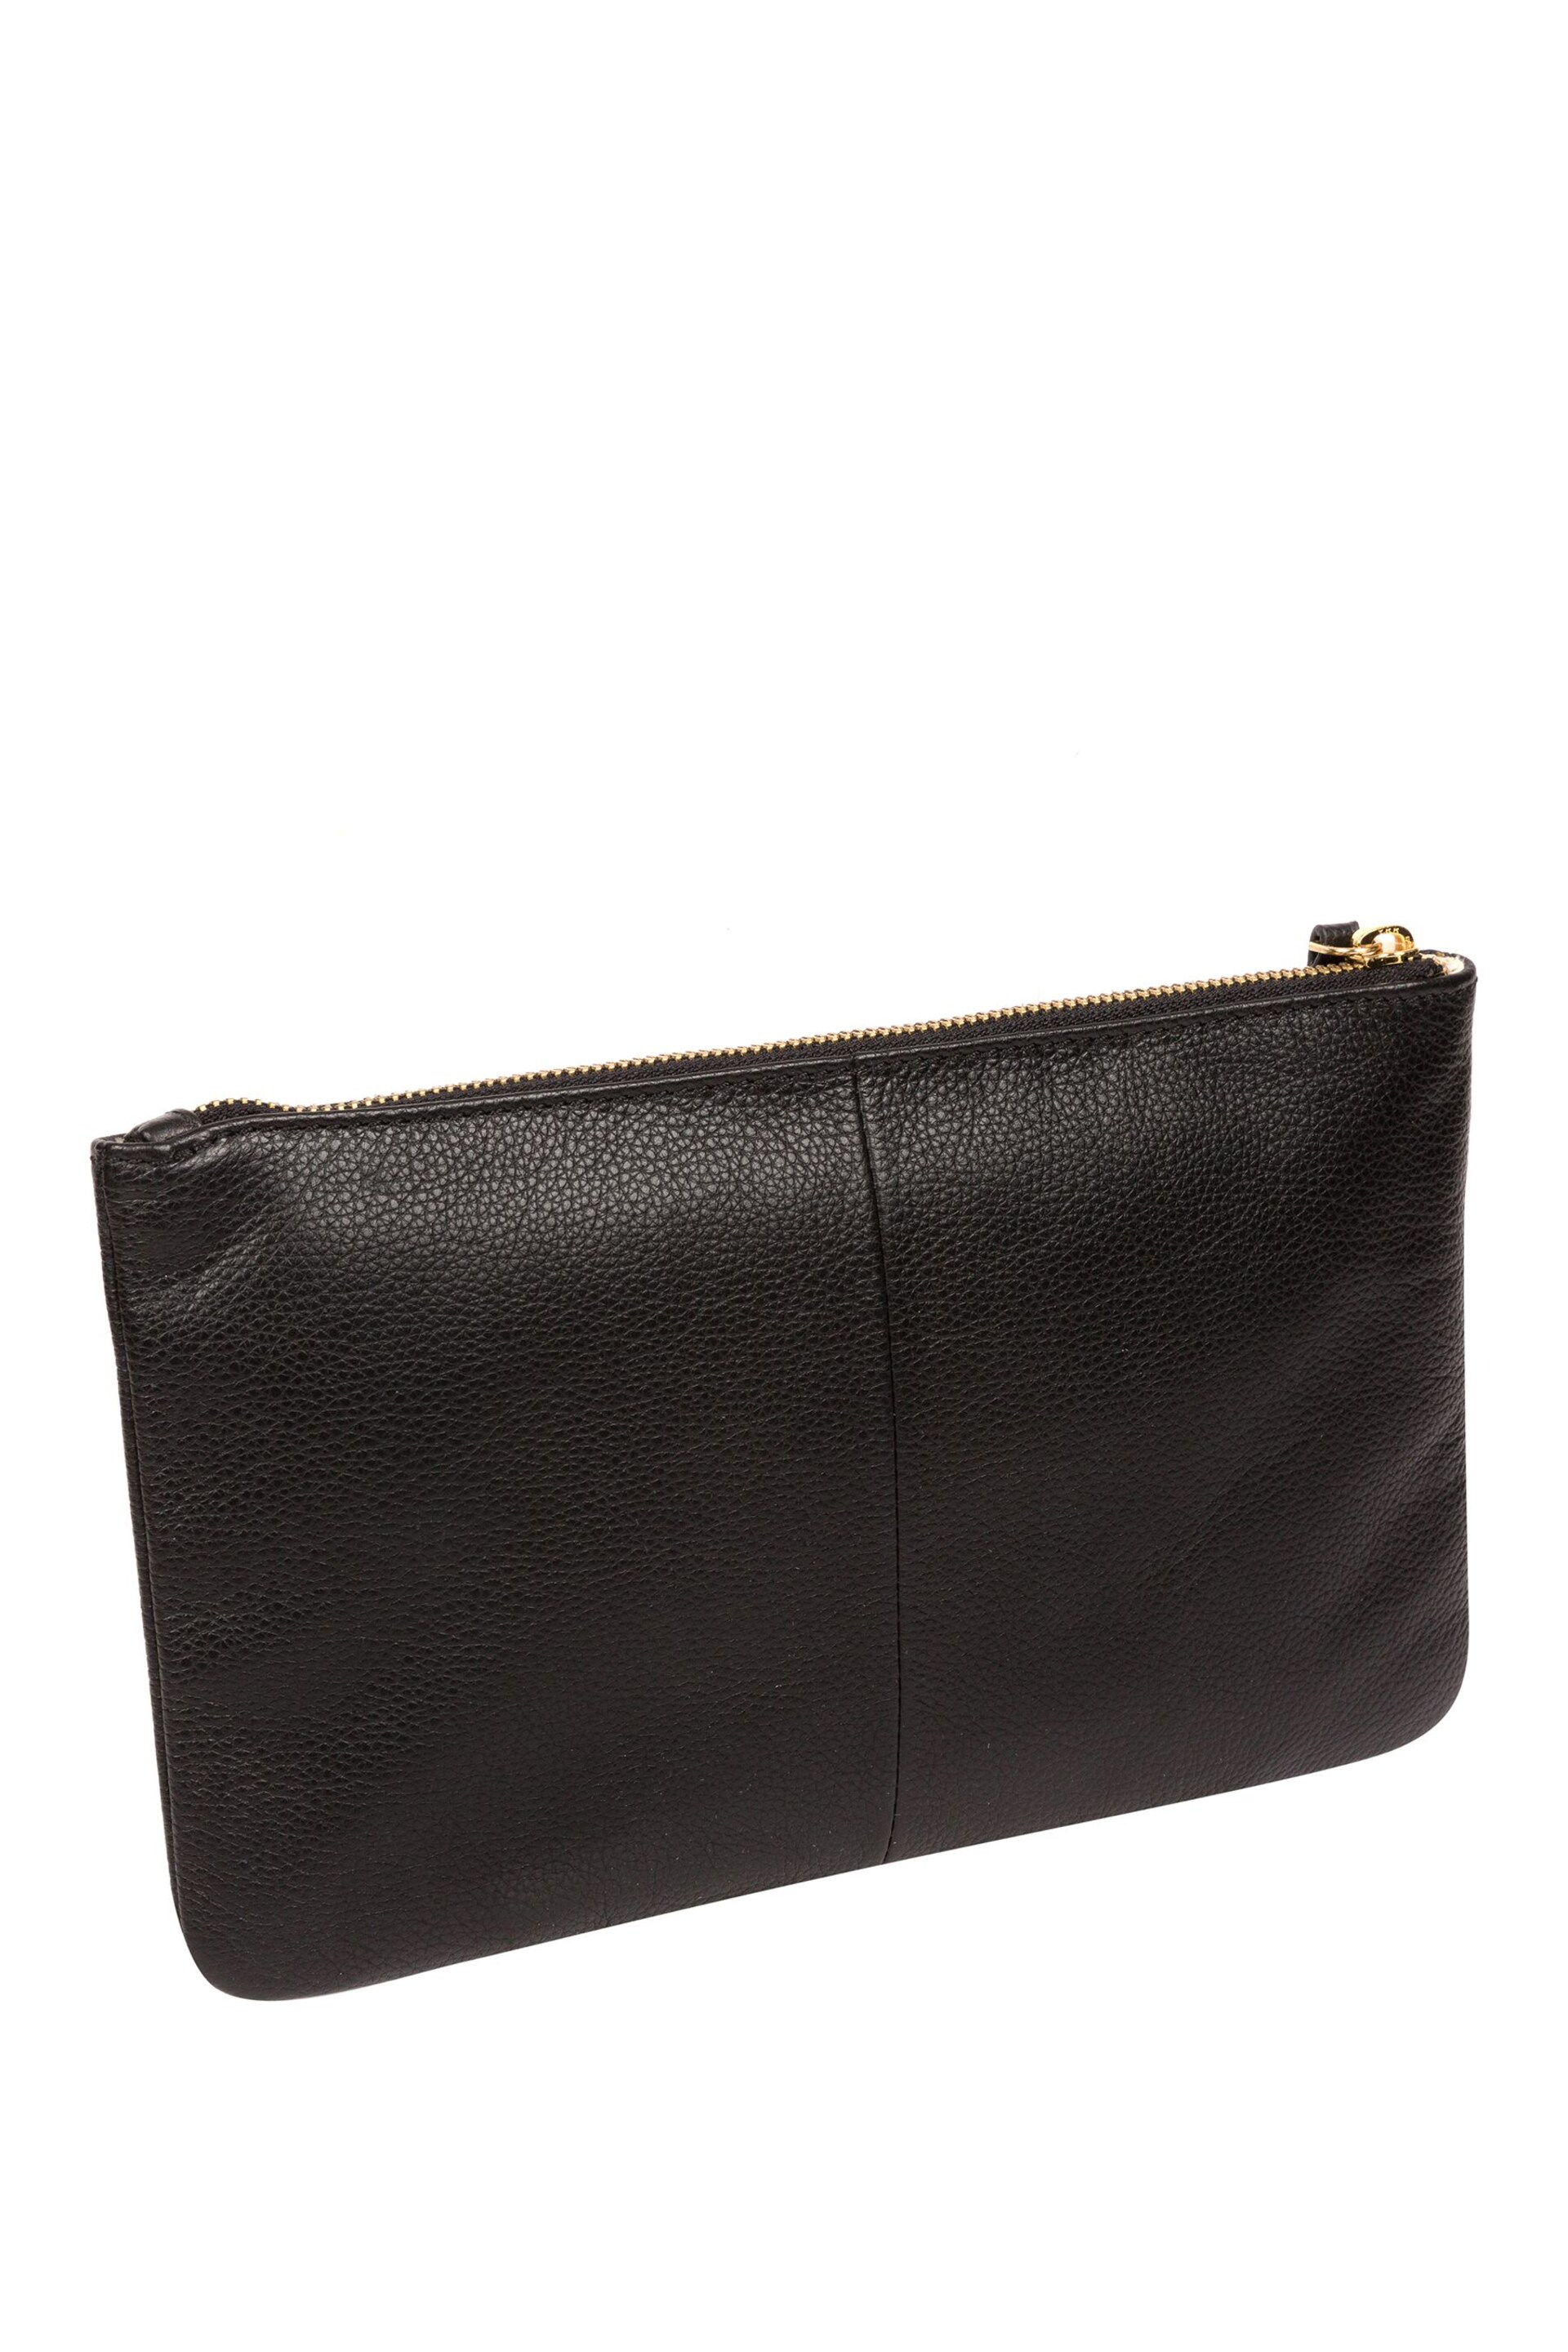 Pure Luxuries London Arlesey Leather Clutch Bag - Image 2 of 4